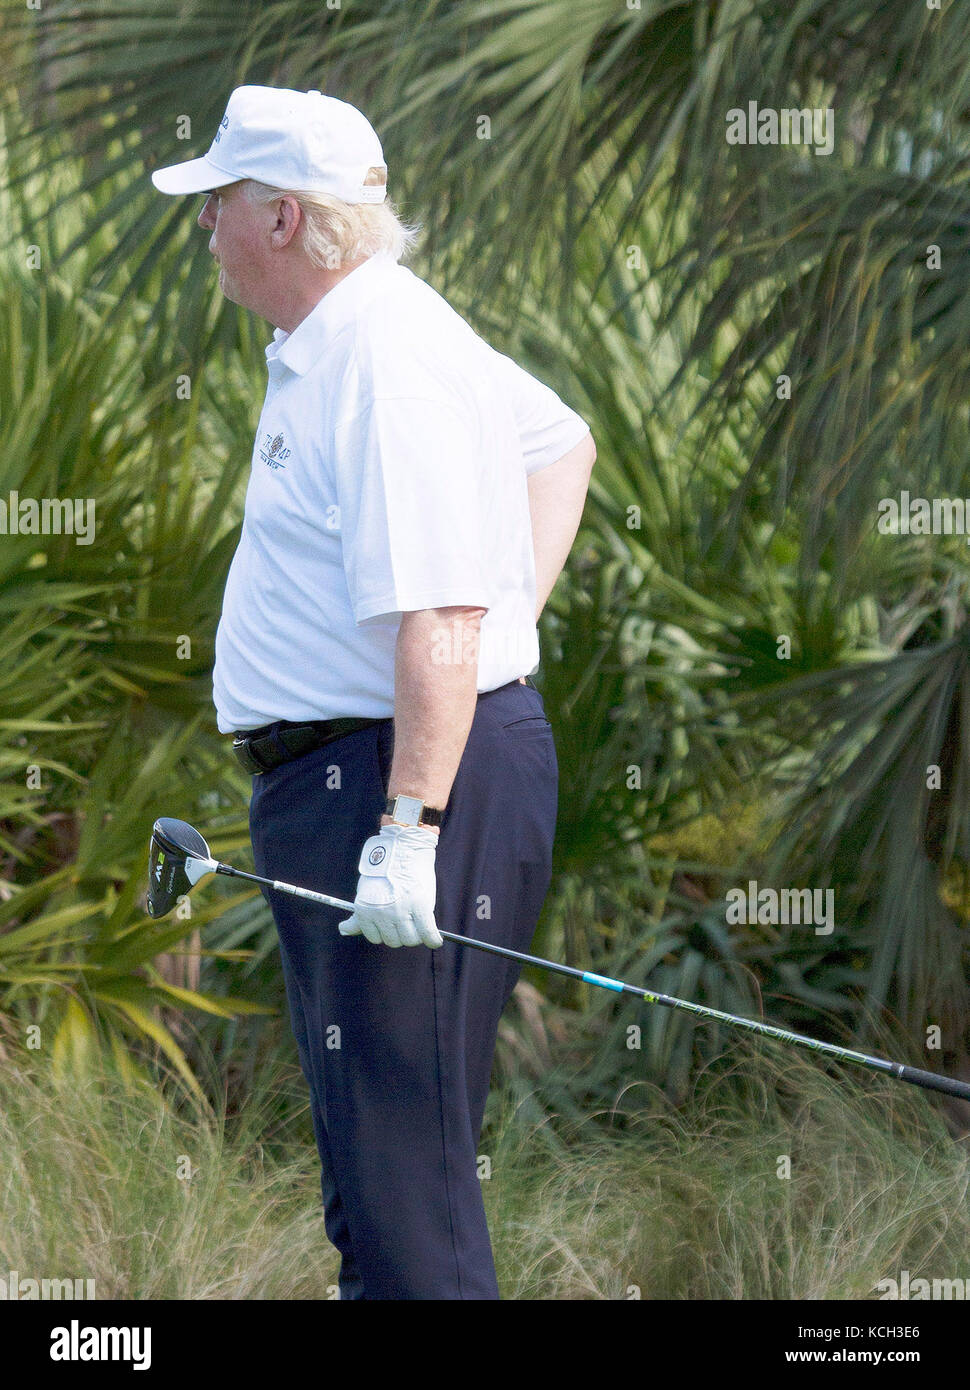 JUPITER, FL - FEBRUARY 11: (EXCLUSIVE COVERAGE) - NY DALLIES OUT- FRANCE OUT - US President Donald Trump and Japan's Prime Minister Shinzo Abe enjoy playing golf in Florida After reportedly hitting it off in the Oval Office, President Donald Trump and his Japanese counterpart Shinzo Abe teed off on the golf course and discussed US-Asia engagement. on February 11, 2017 in Jupiter, Florida.  People:  Donald Trump  Transmission Ref:  MNC45  Hoo-Me.com / MediaPunch Stock Photo